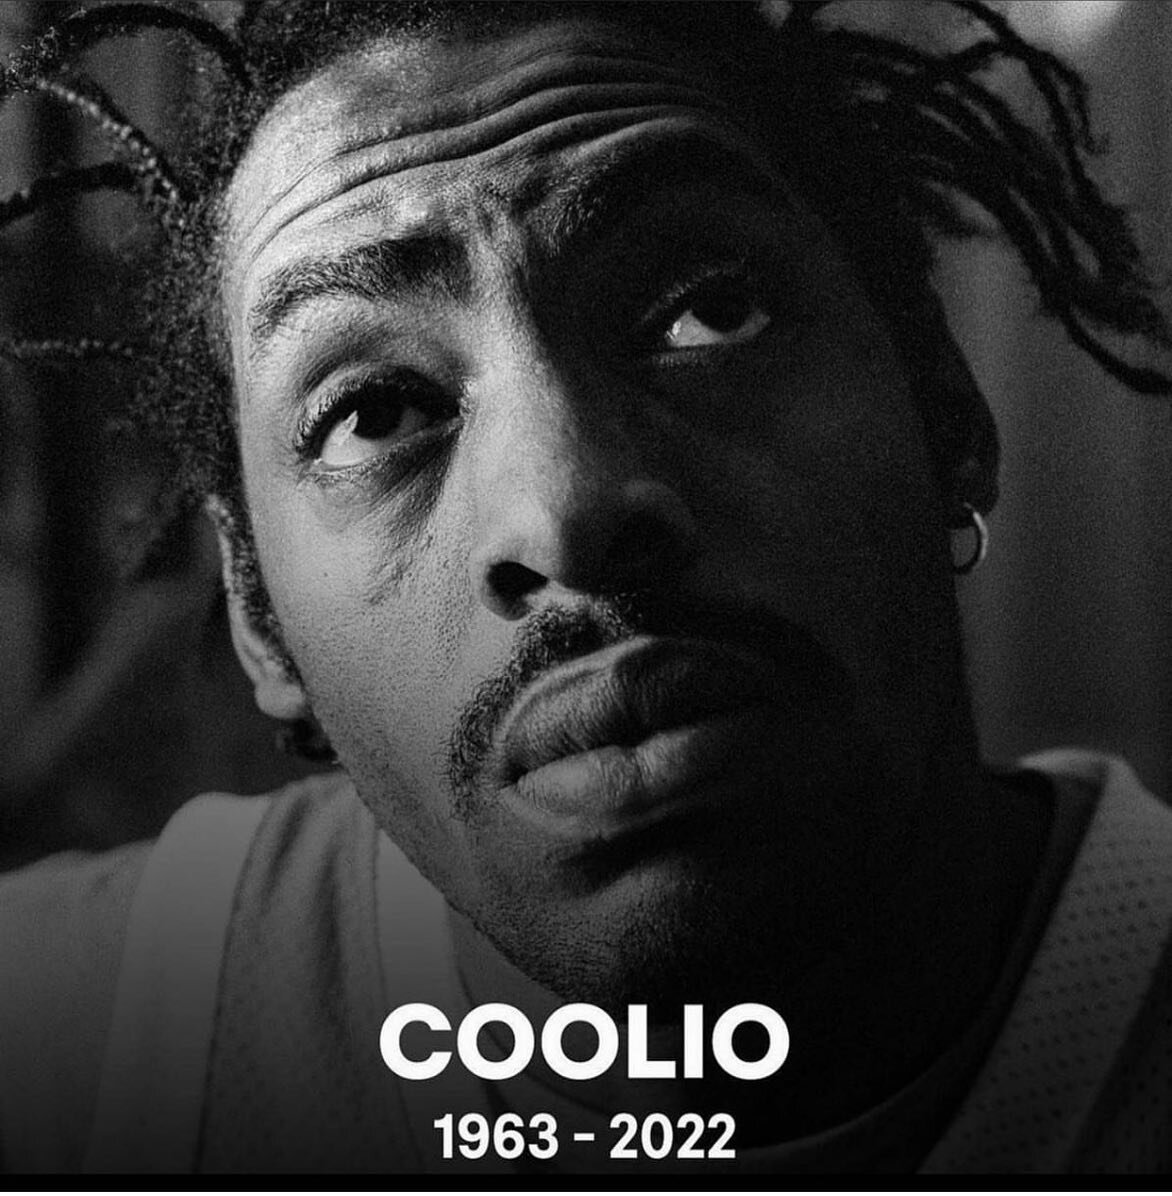 Rest In Peace @coolio the popular 90s rapper passed away today at the age of 59 #restinpeacecoolio